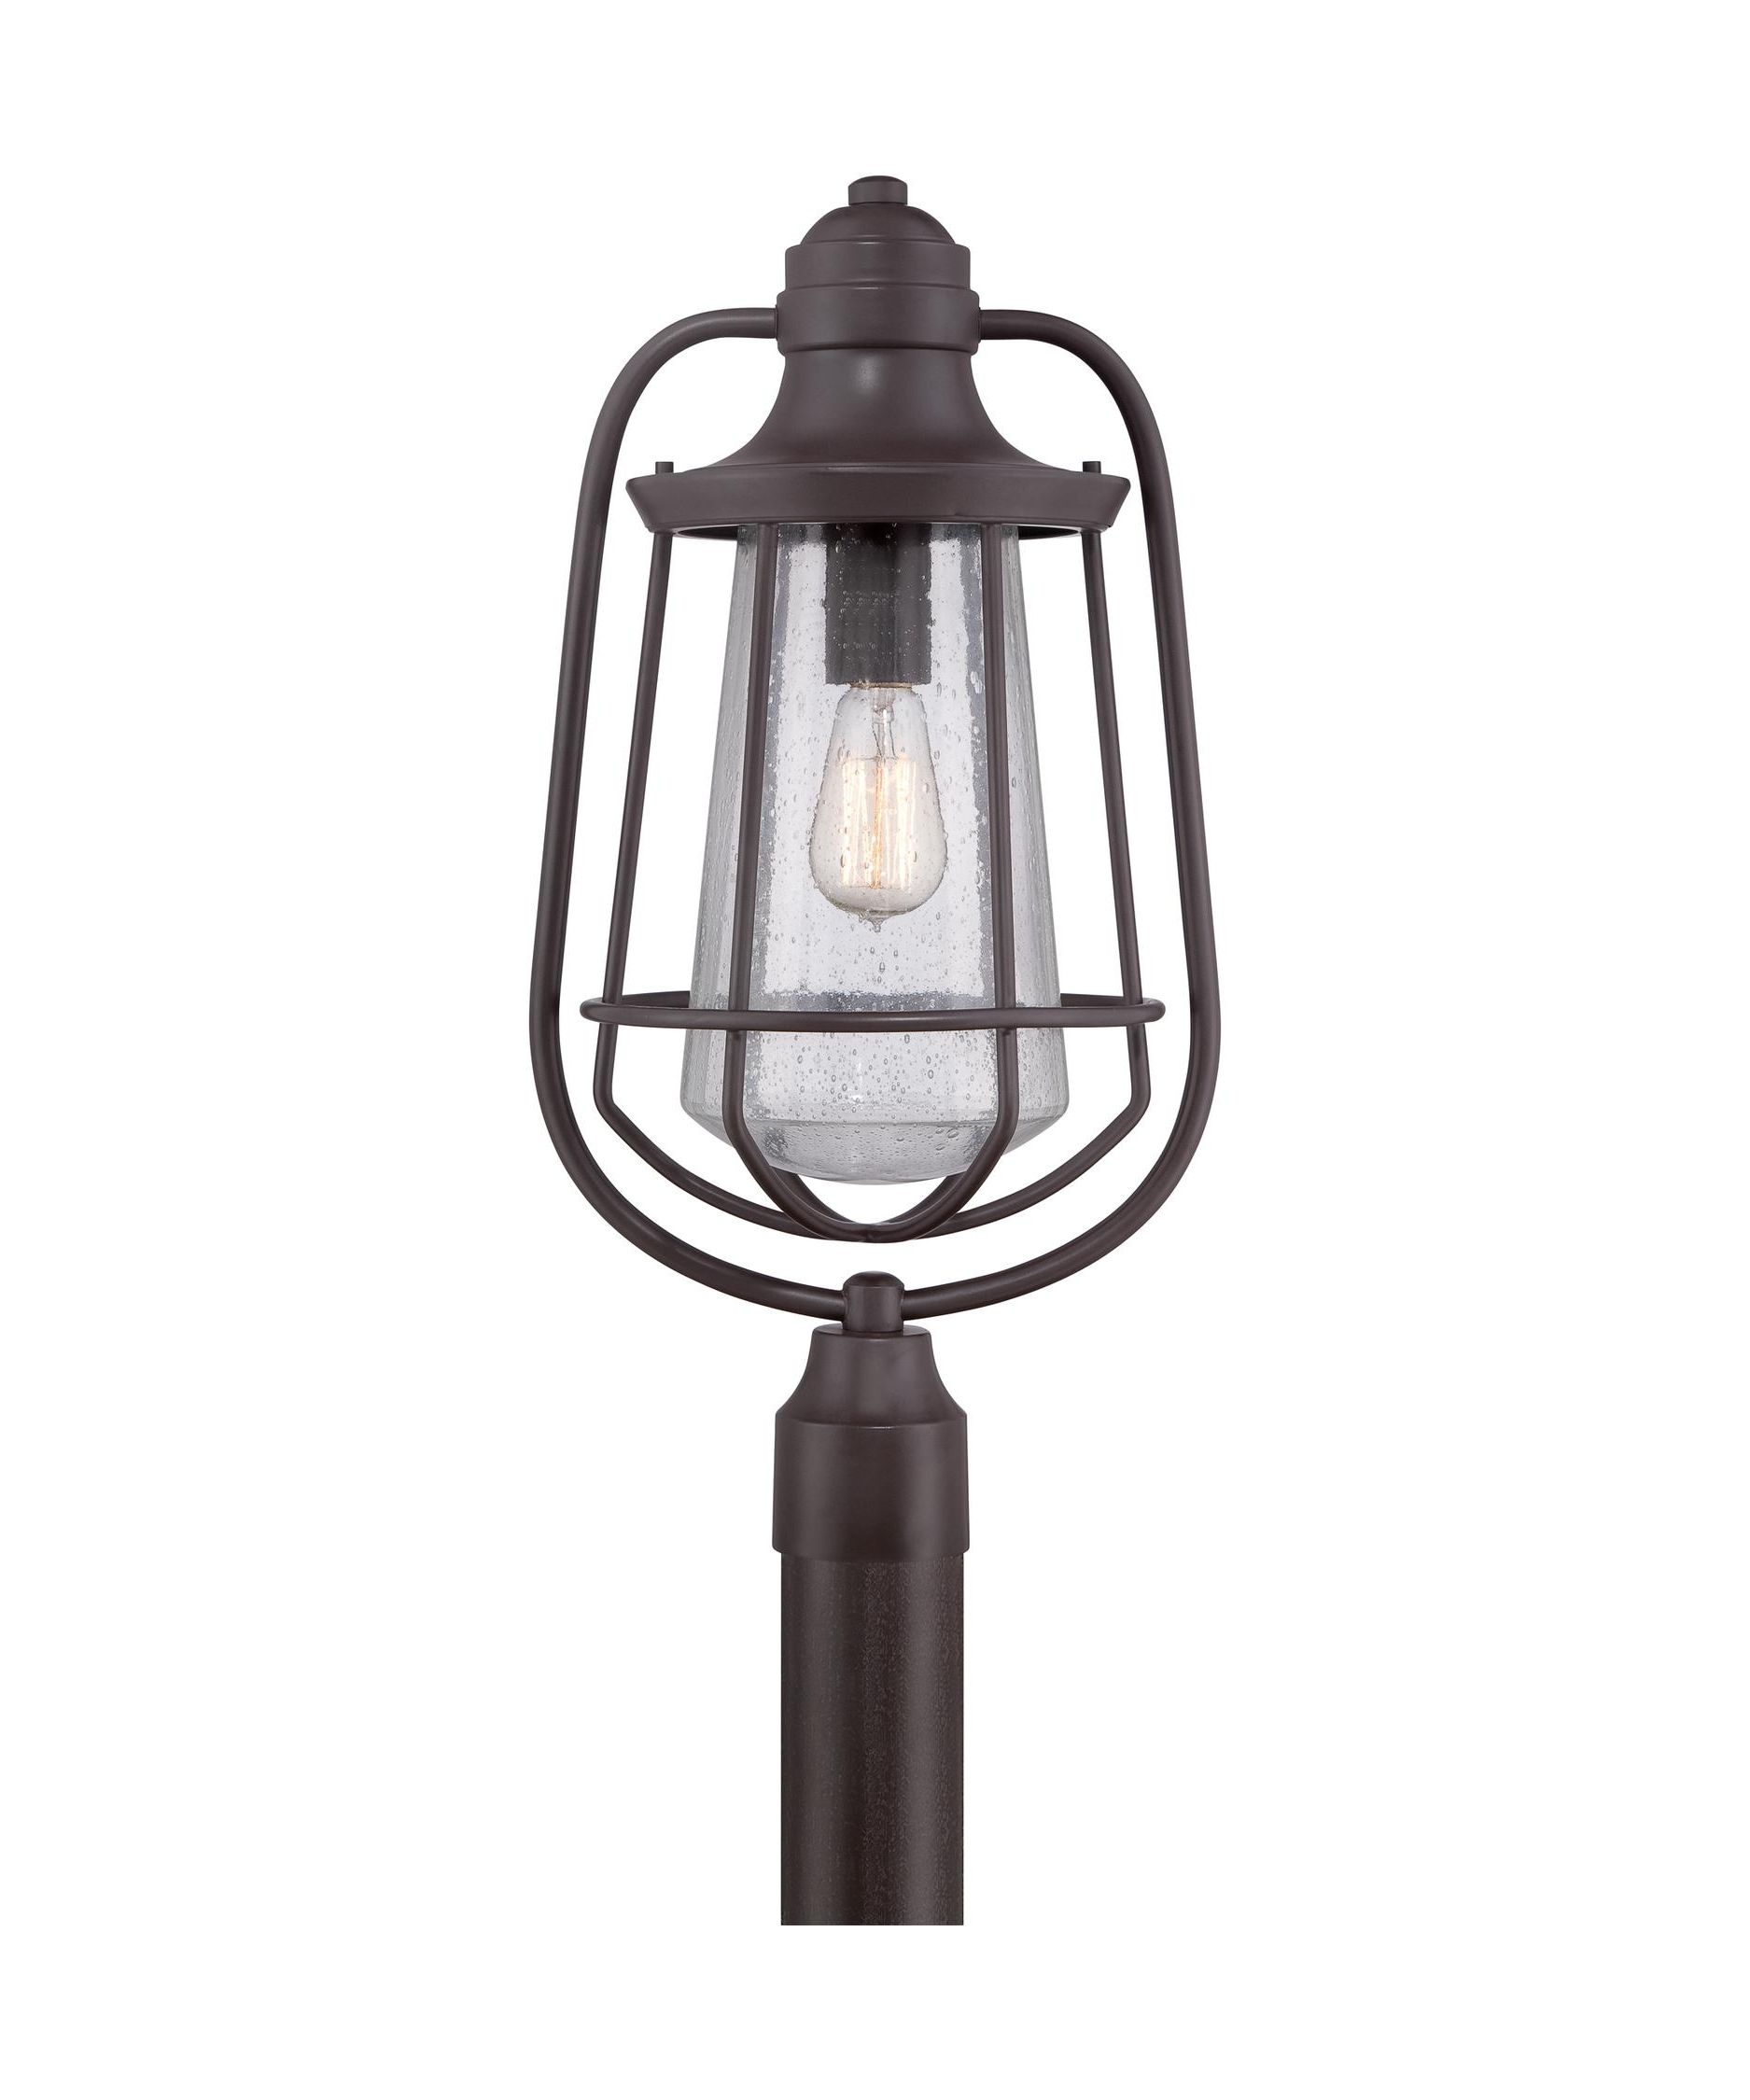 Outdoor Lanterns For Posts Intended For Widely Used Outdoor Light : Outdoor Lamp Posts Costco , Outdoor Light Post (View 8 of 20)